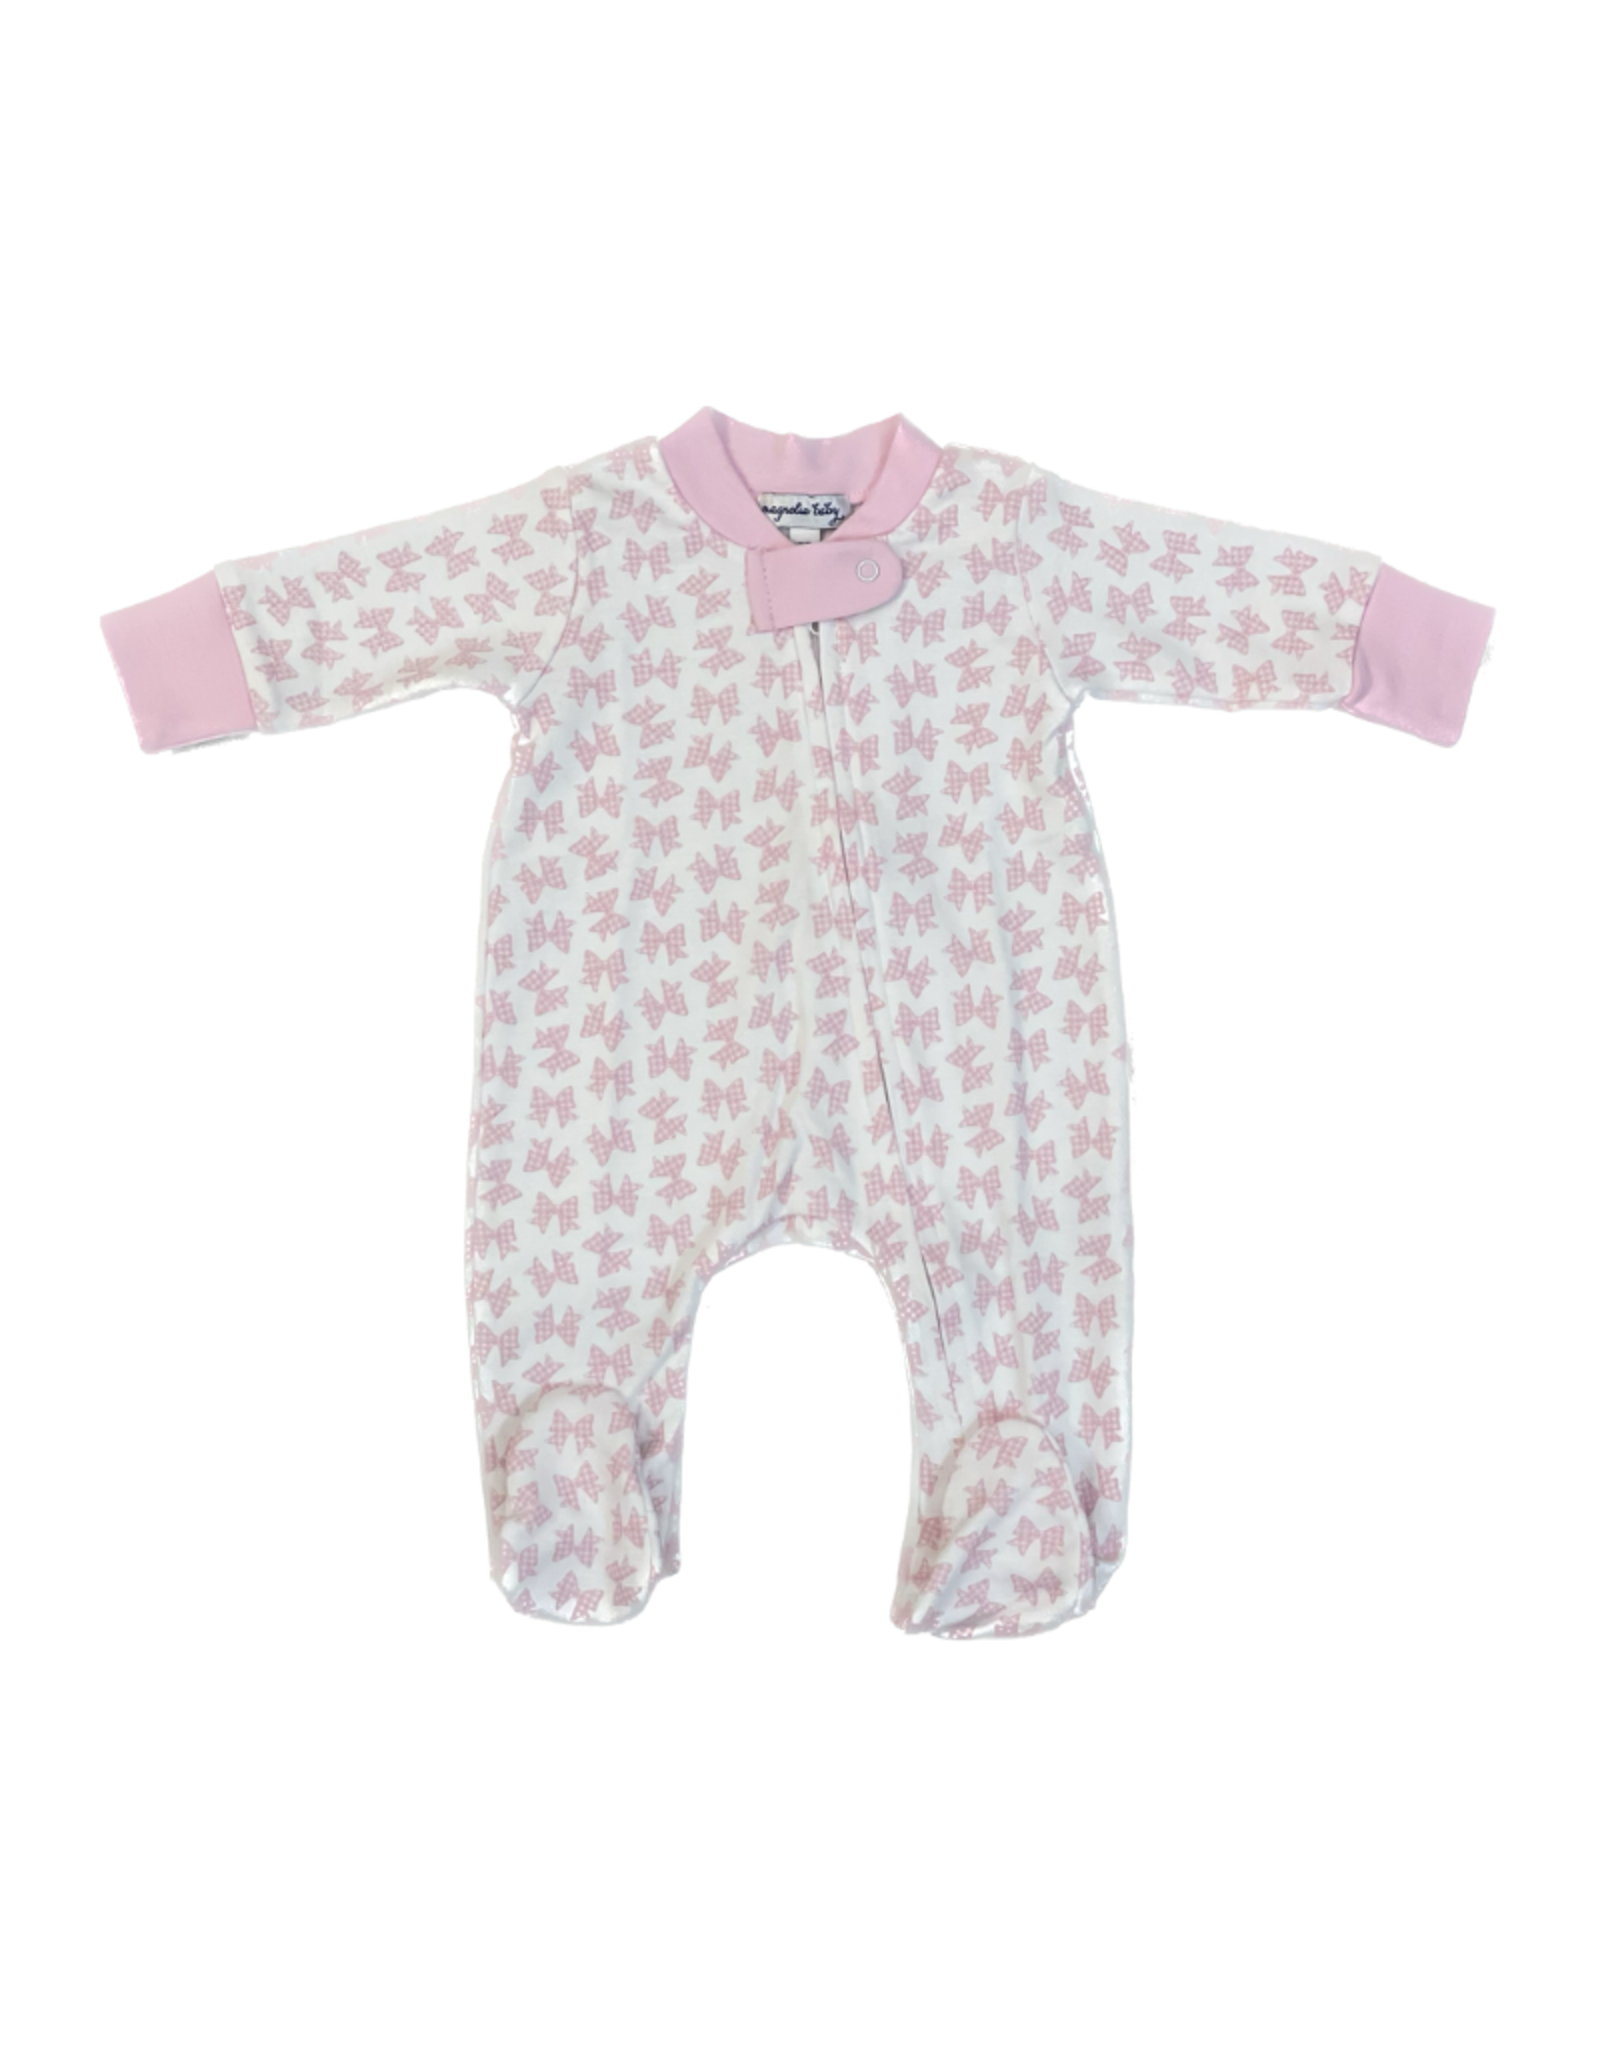 Magnolia Baby Gingham Bows Printed Zipped Footie